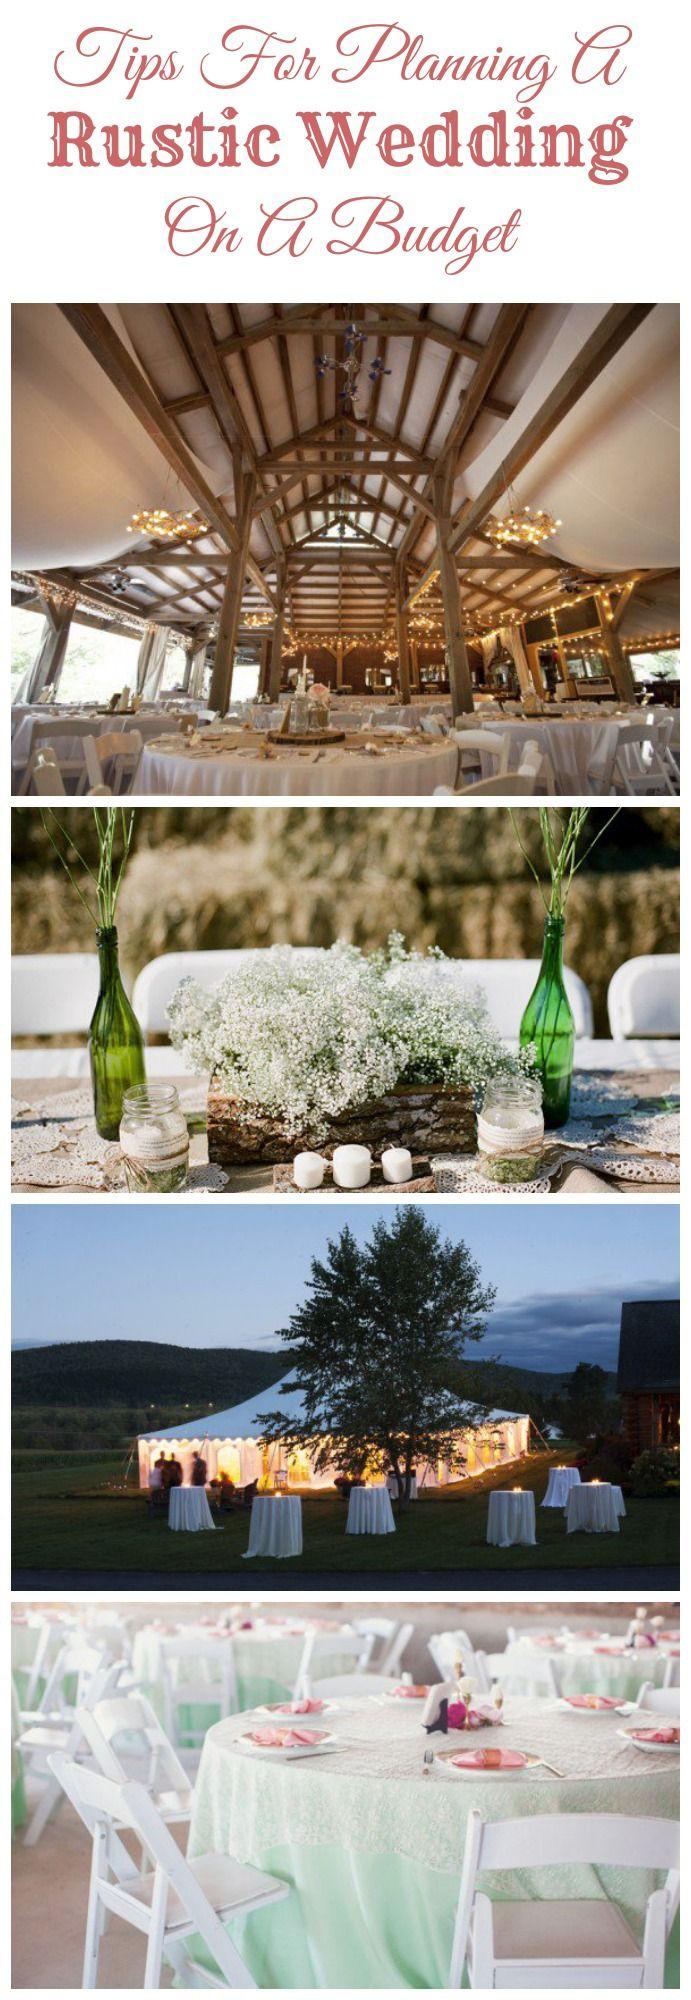 Wedding - Tips For Planning A Rustic Wedding On A Budget